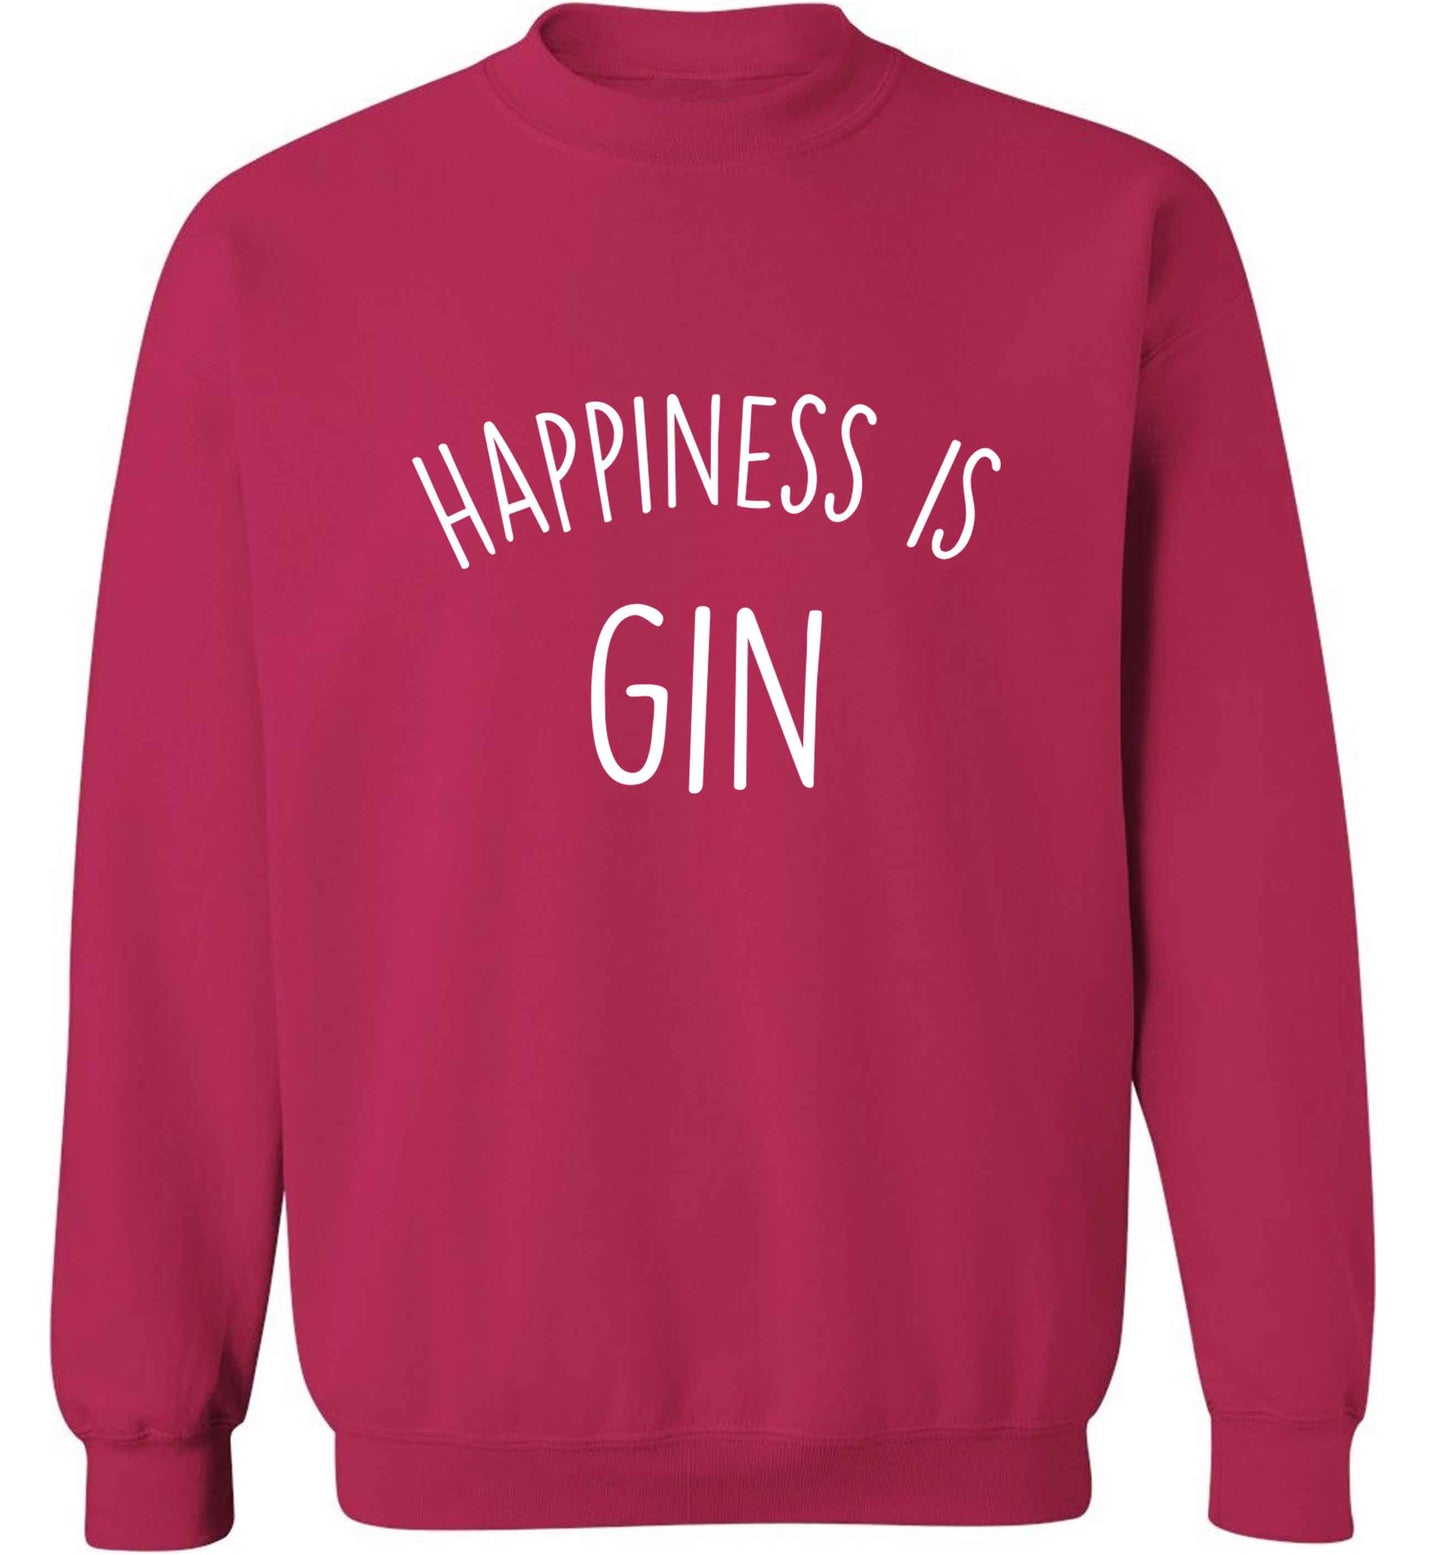 Happiness is gin adult's unisex pink sweater 2XL